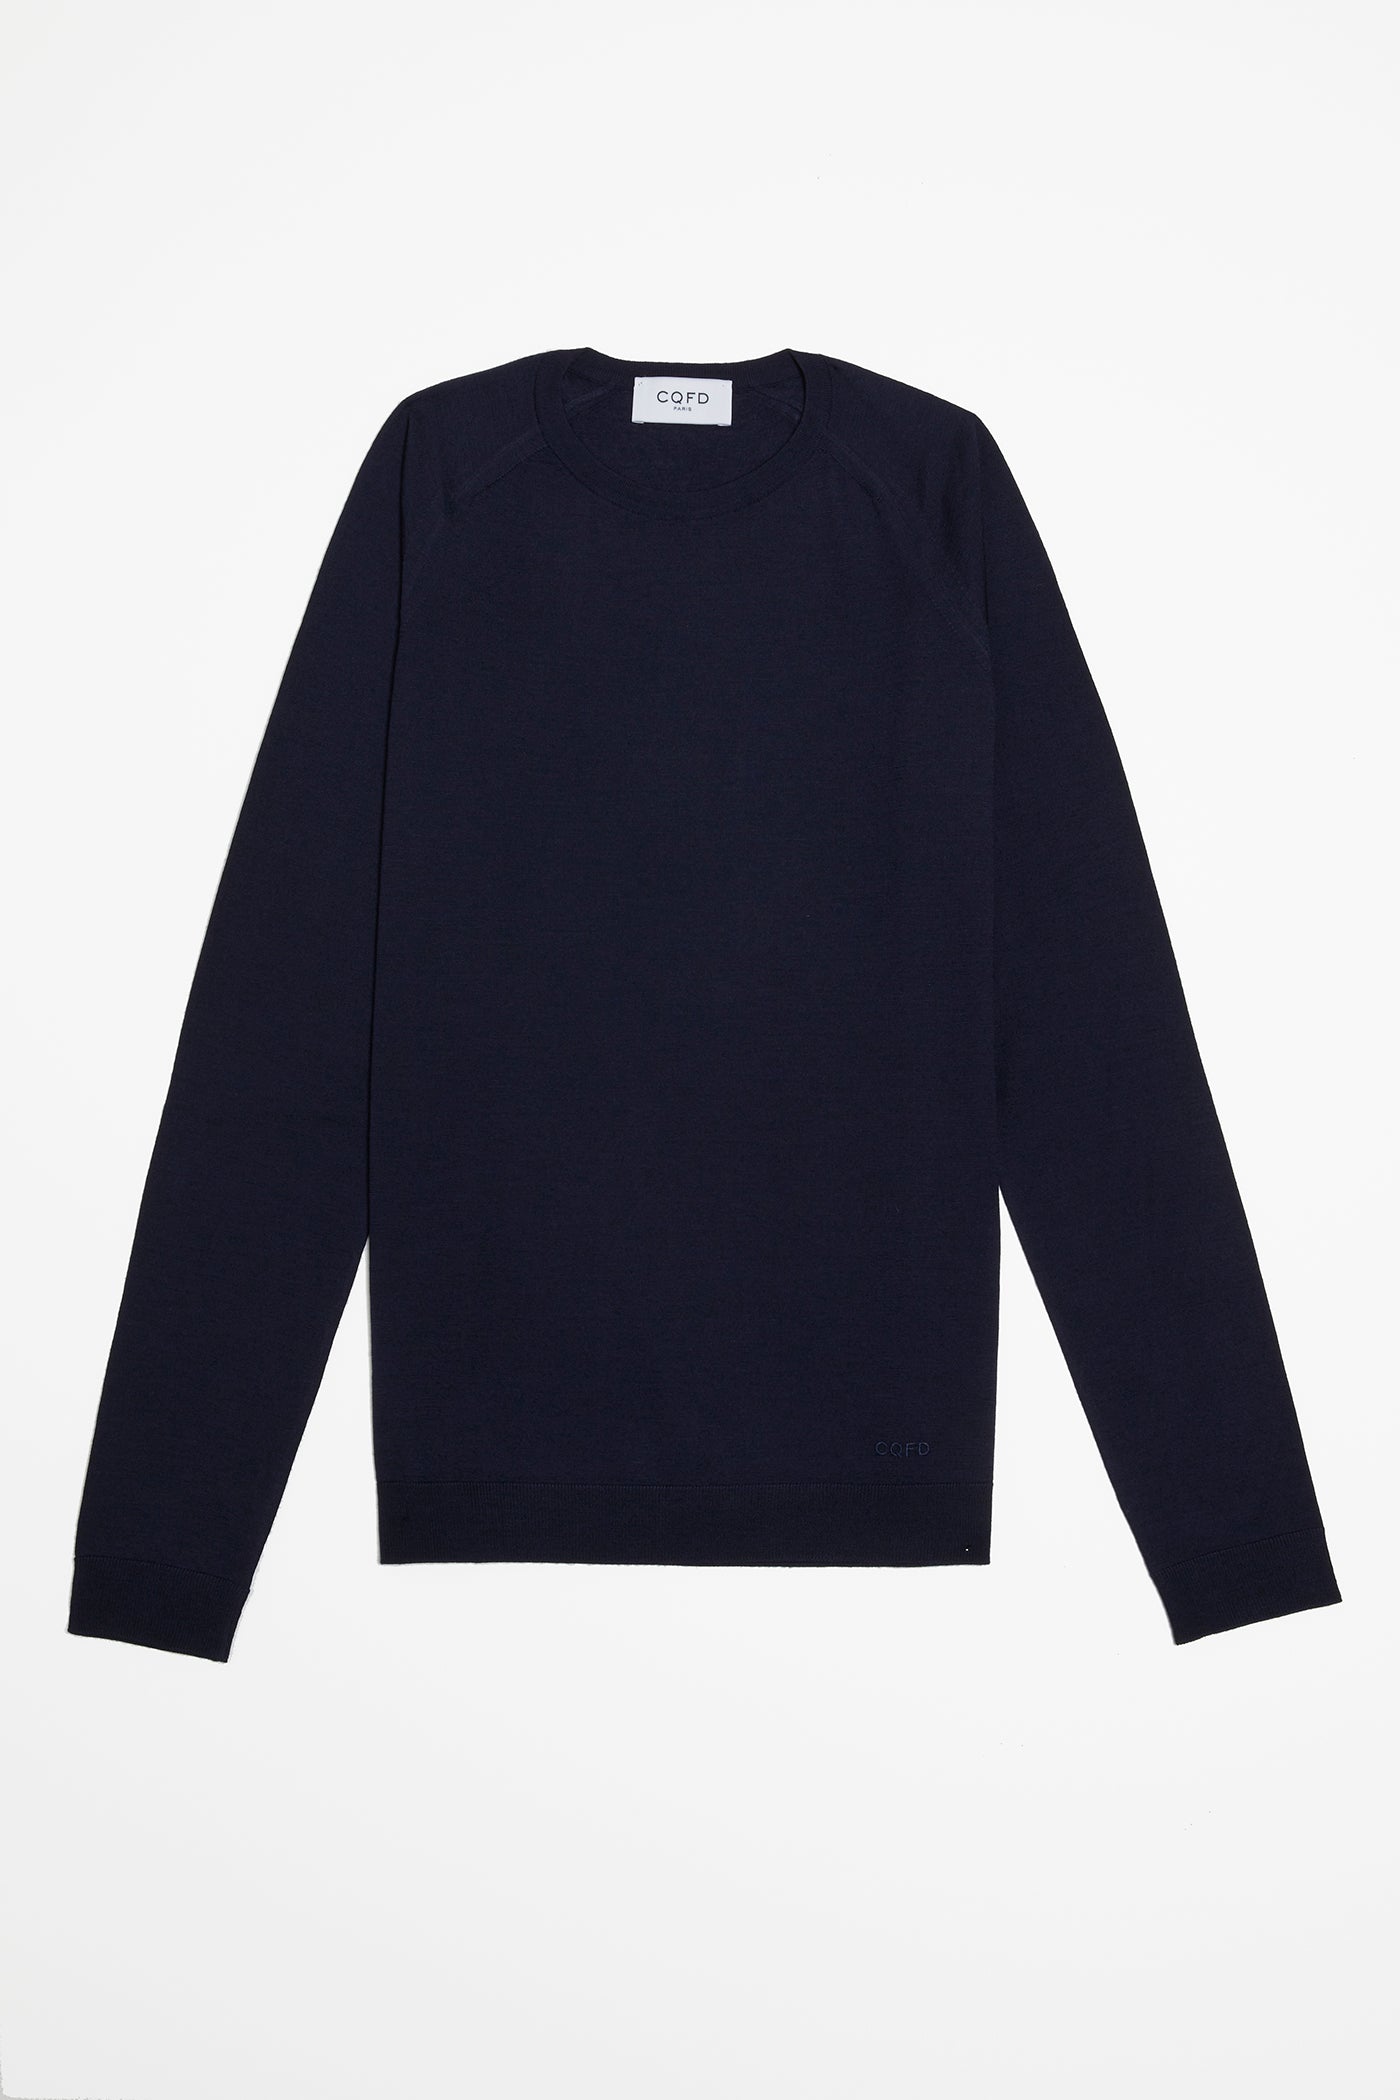 THE EXTRA FINE WOOL SWEATER